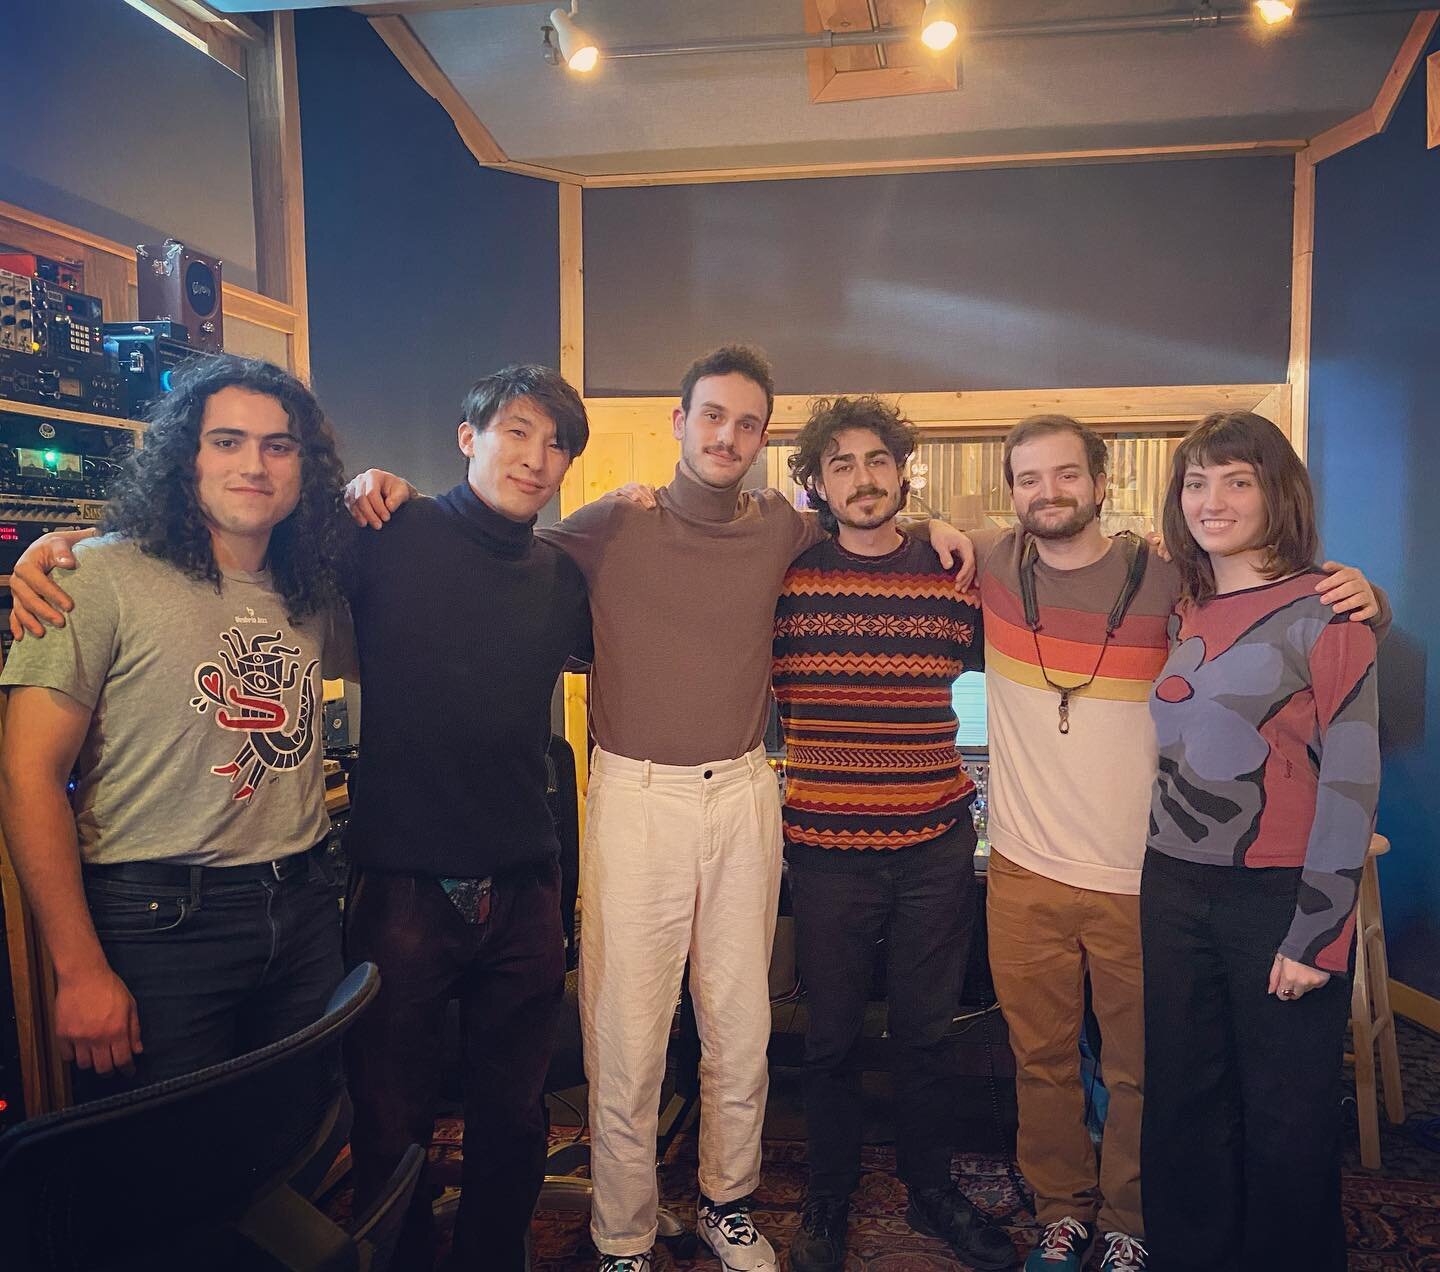 Finished recording my 8 original compositions with this special musicians. Feel so blessed. My first album will come out this year. Stay tuned!! #canopusdrums #zildjancymbals #istanbulcymbalsagop @gbsjukejoint #jazz